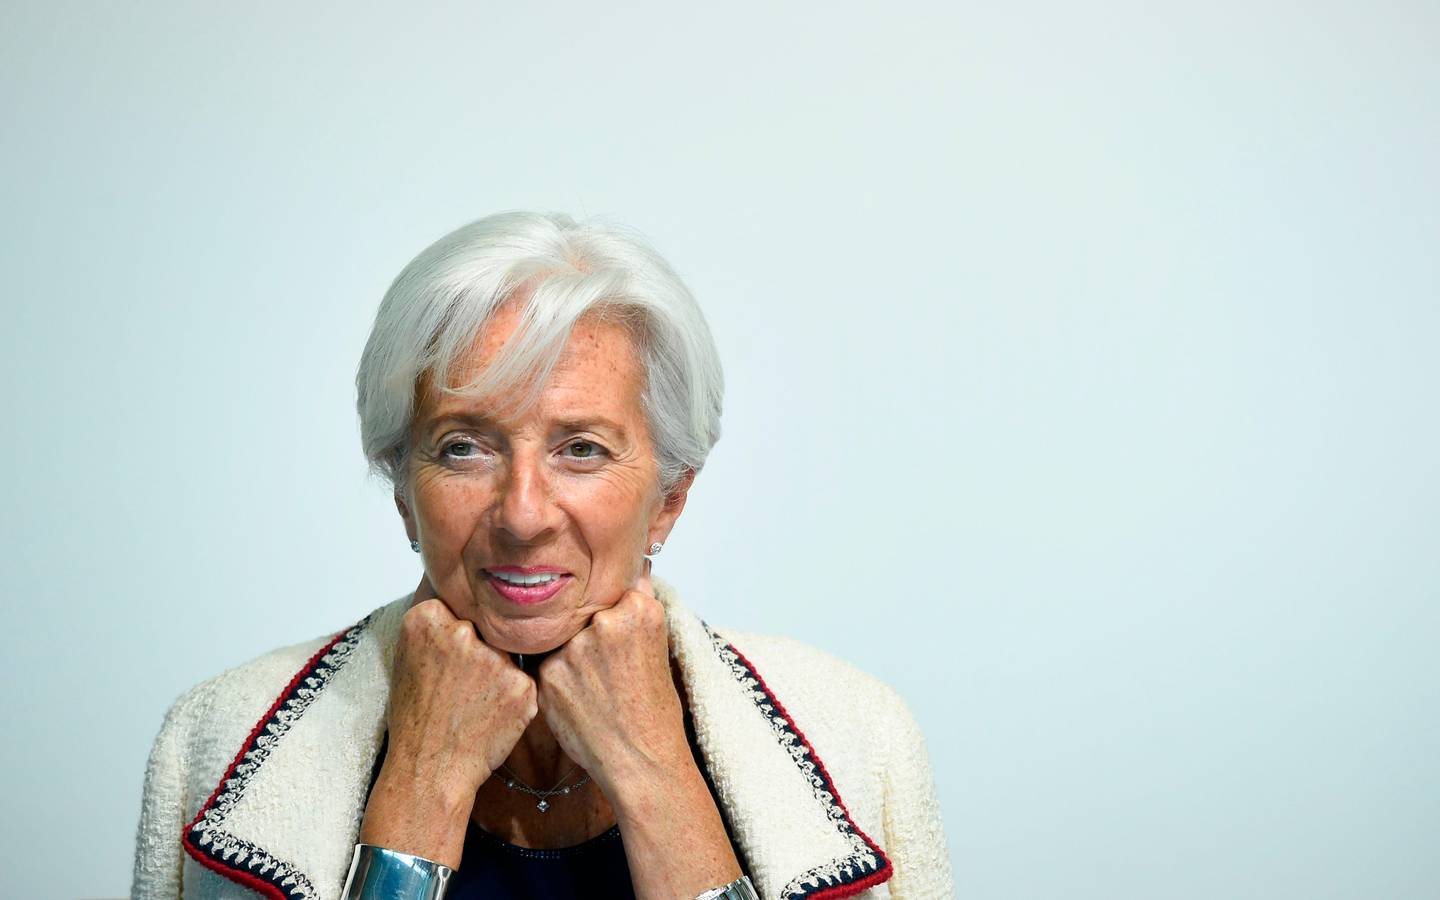 (FILES) In this file photo taken on June 13, 2019 International Monetary Fund (IMF) managing Director Christine Lagarde smiles during a press conference during an Eurogroup meeting at the EU headquarters in Luxembourg. - IMF chief Christine Lagarde may be the first woman to be nominated head of the European Central Bank to replace Mario Draghi. (Photo by JOHN THYS / AFP)